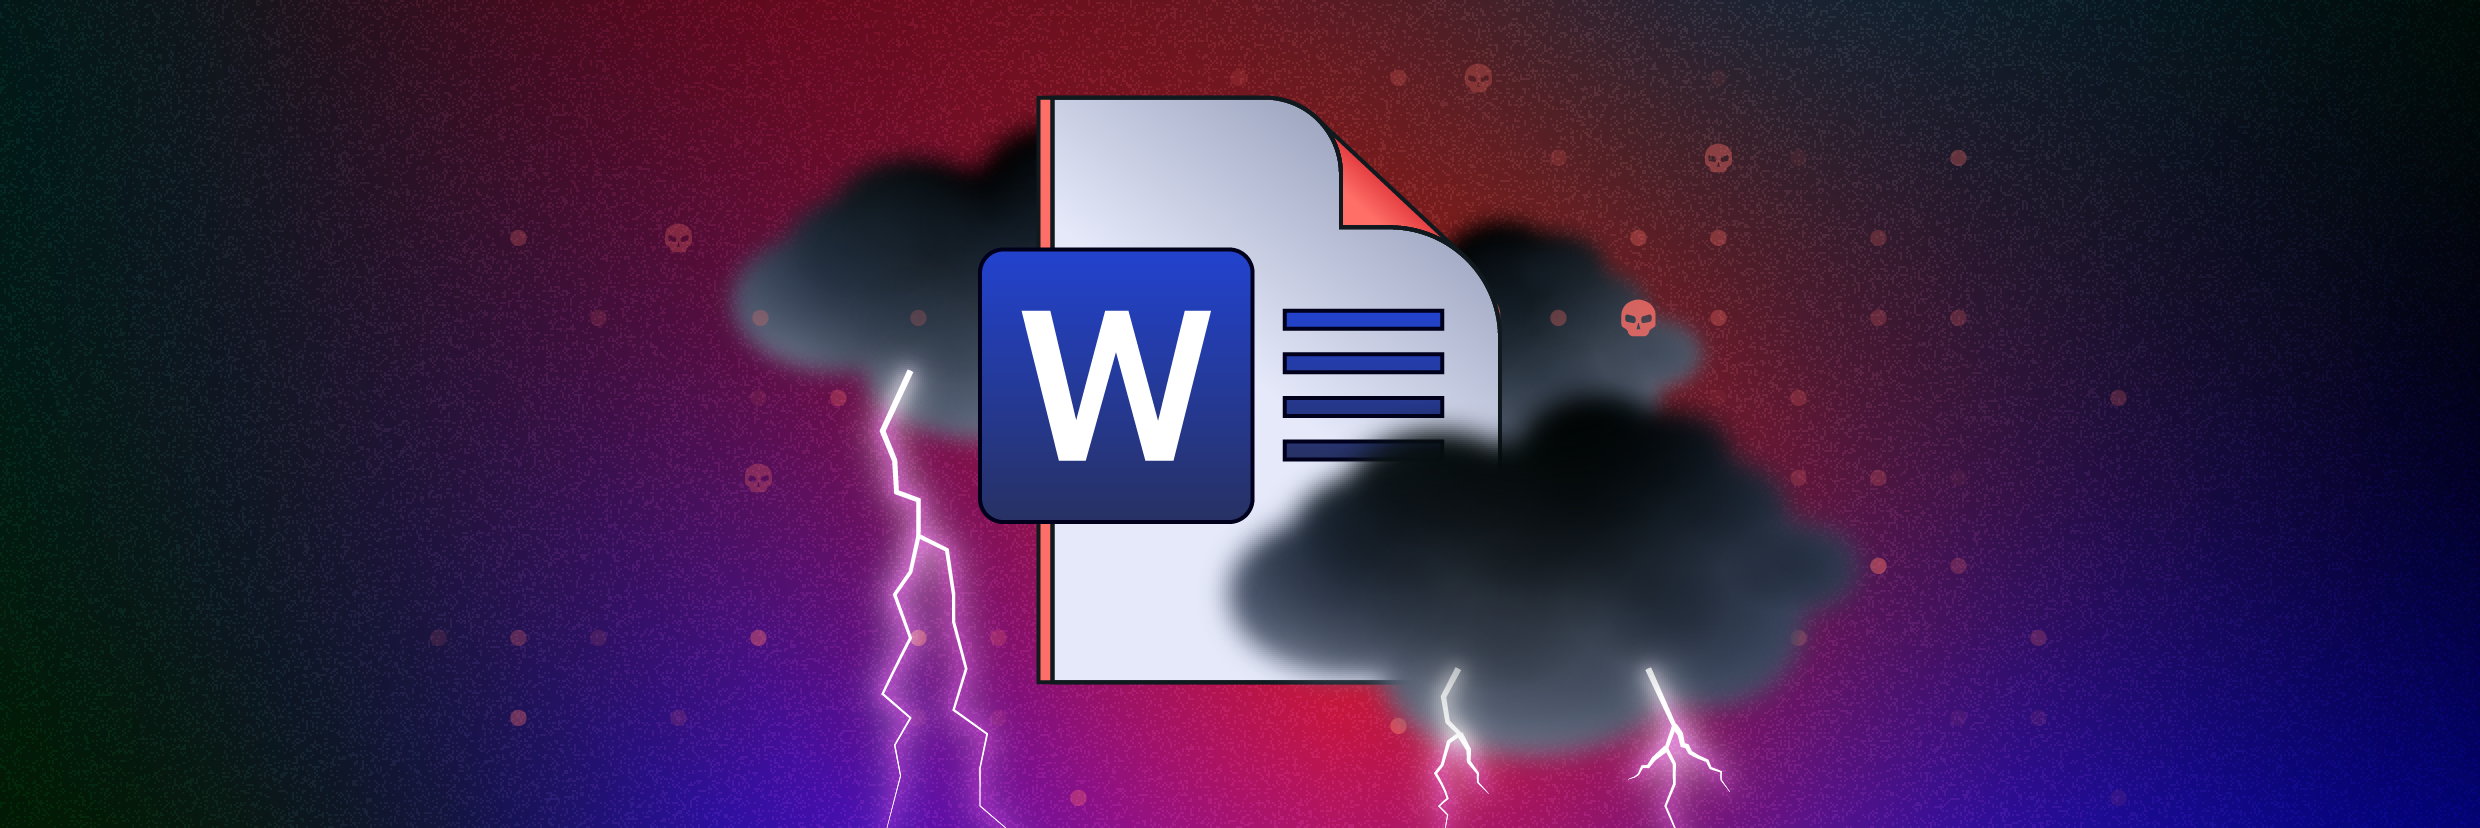 Microsoft Word document surrounded by storm clouds